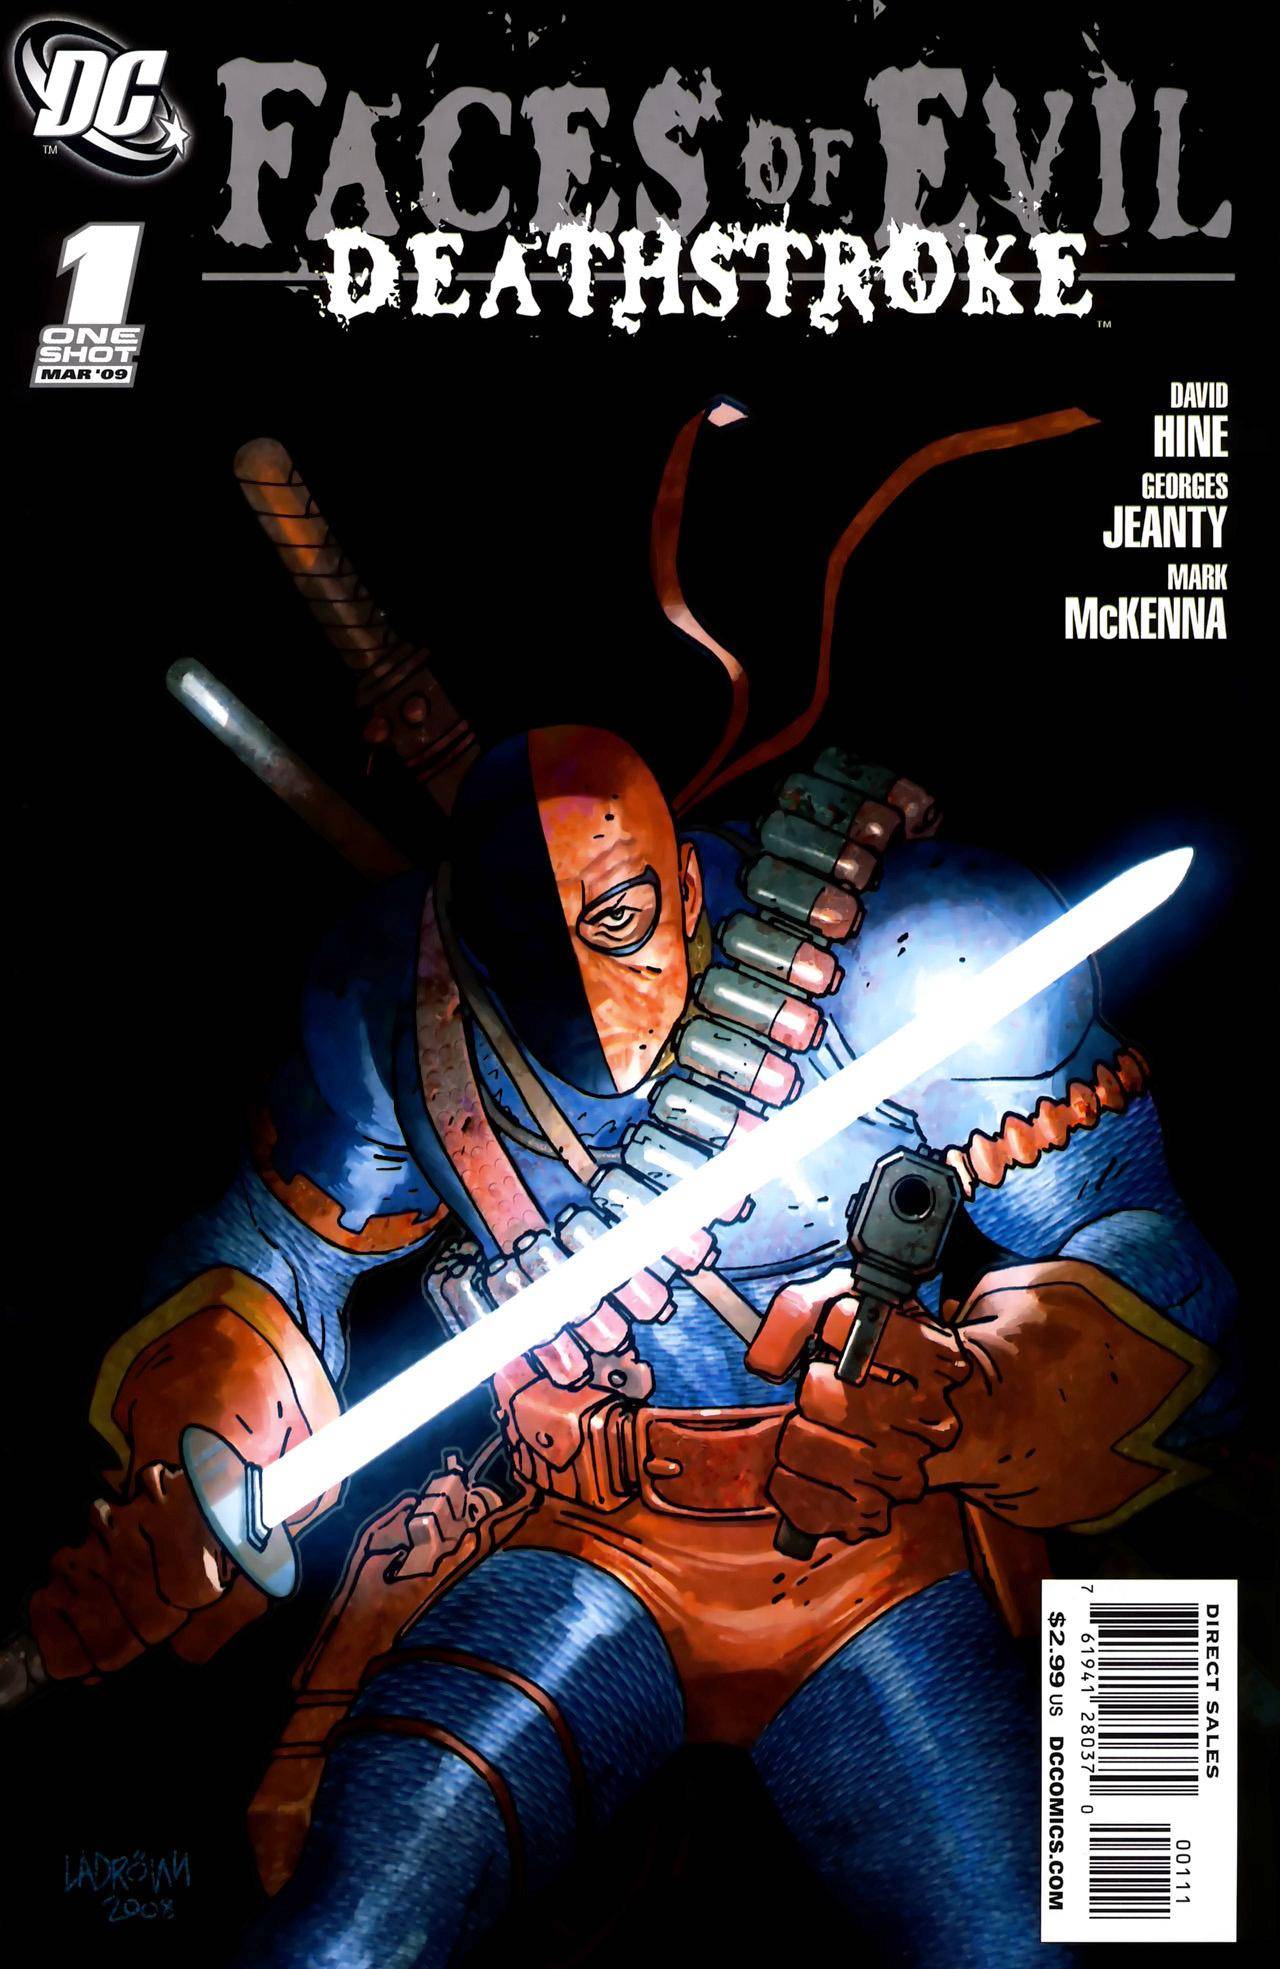 Faces of Evil - Deathstroke (2009)